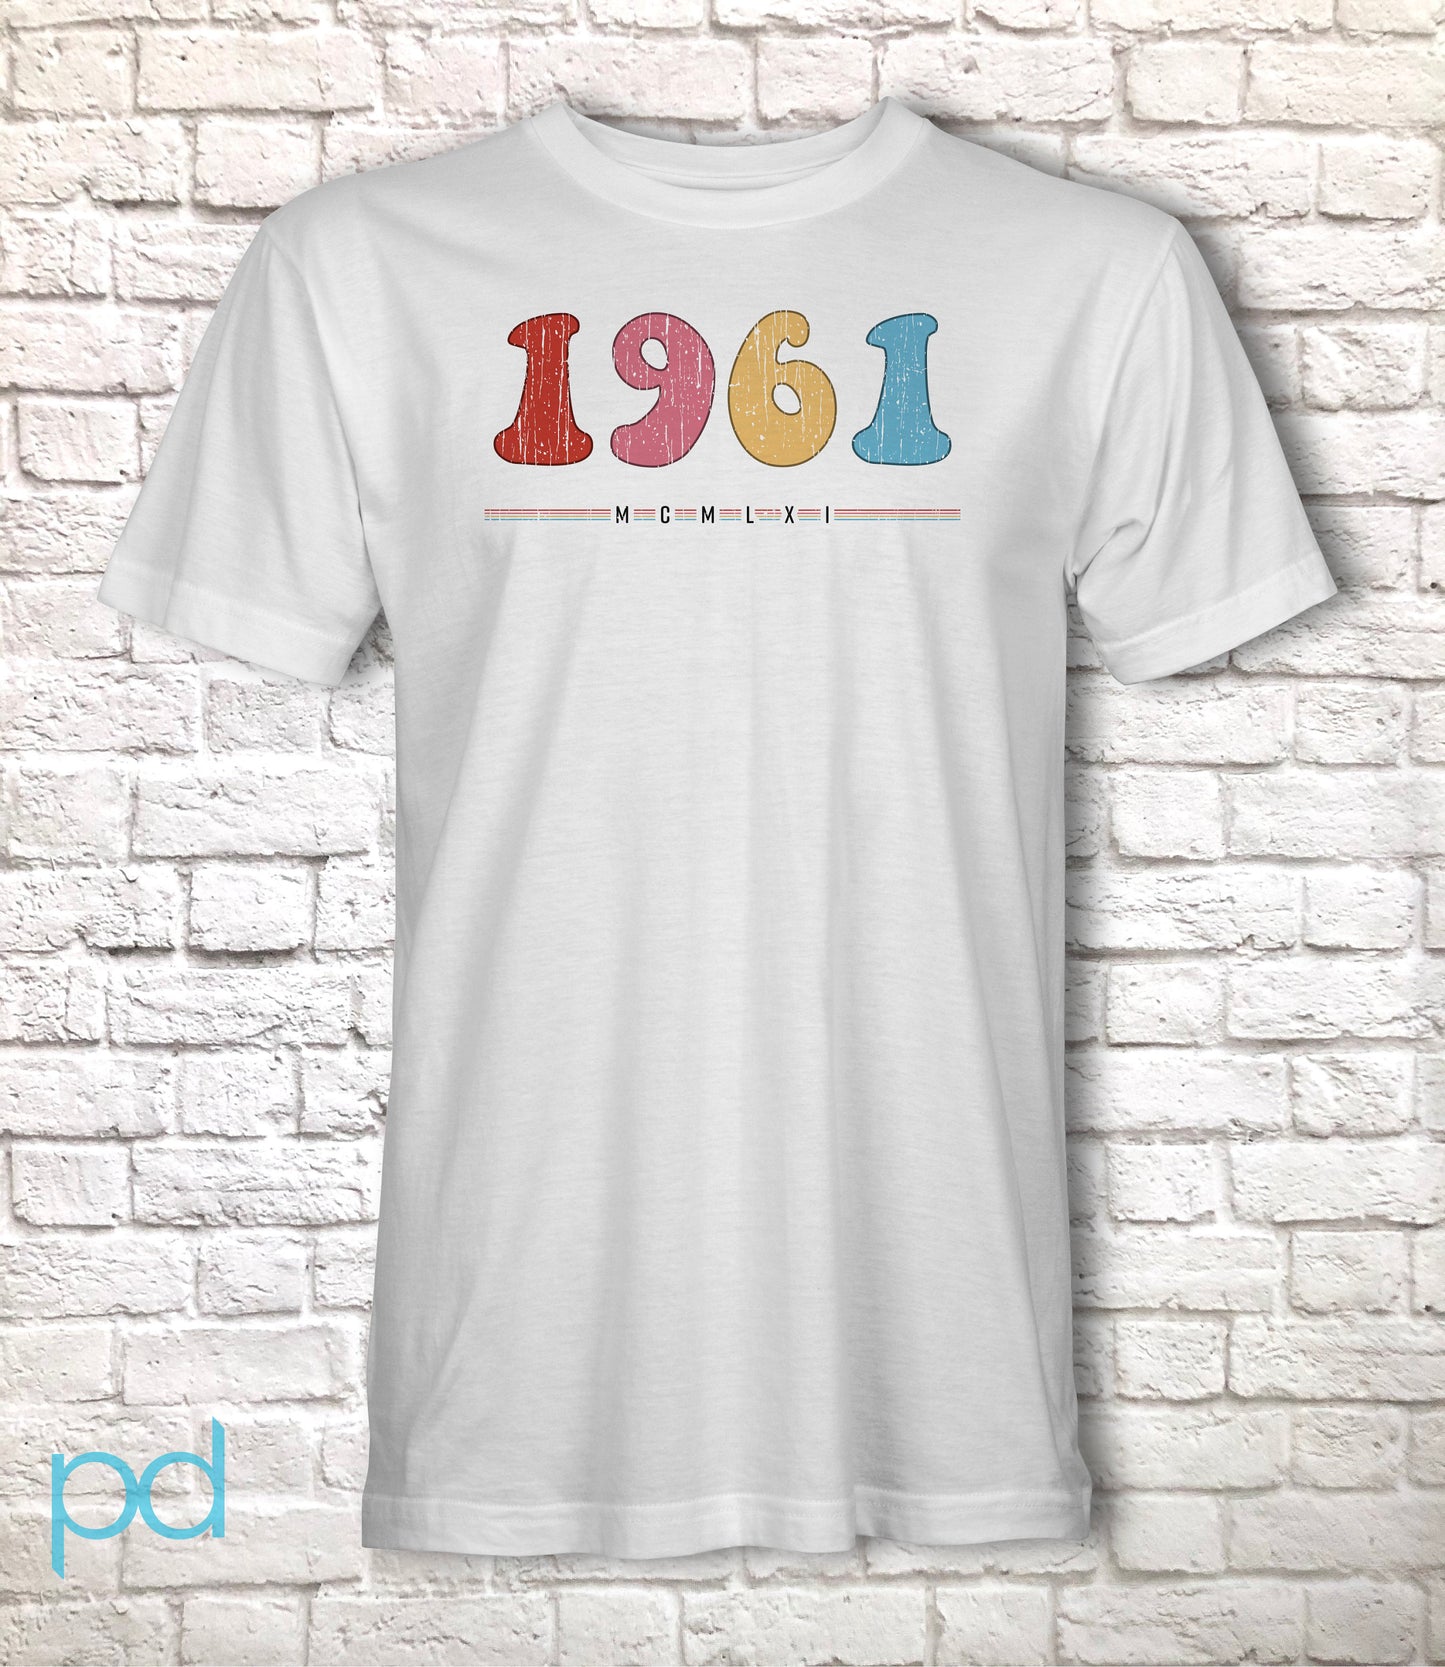 1961 T Shirt, 60th Birthday Gift T-Shirt in Retro & Vintage 60s style, MCMLXI Sixtieth Bday Tee Shirt Top For Men or Women